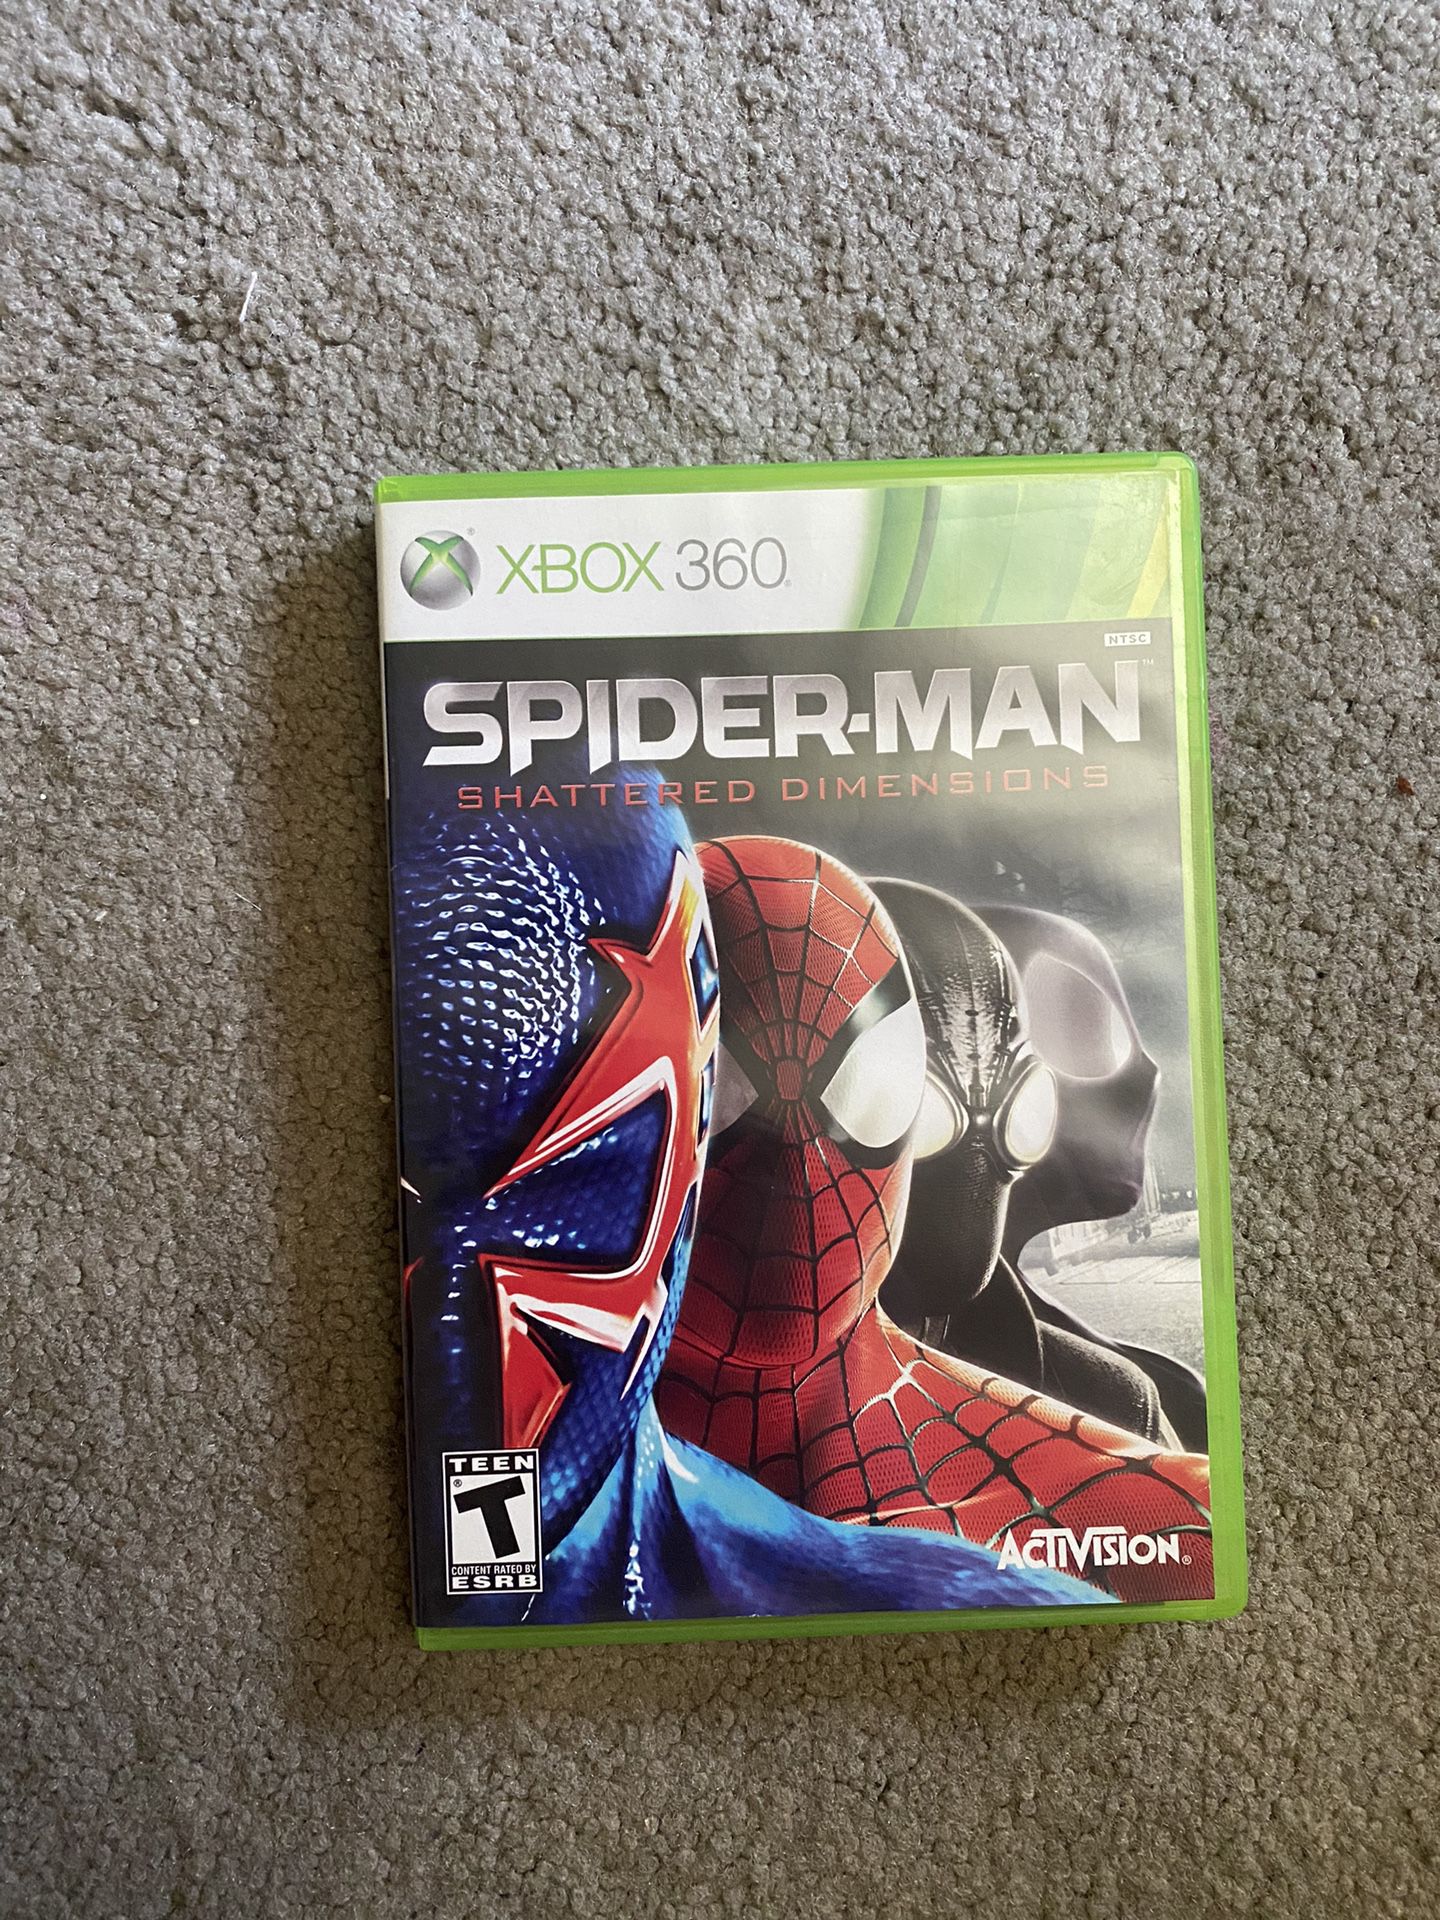 Spiderman Shattered Dimensions Xbox 360 Video Game